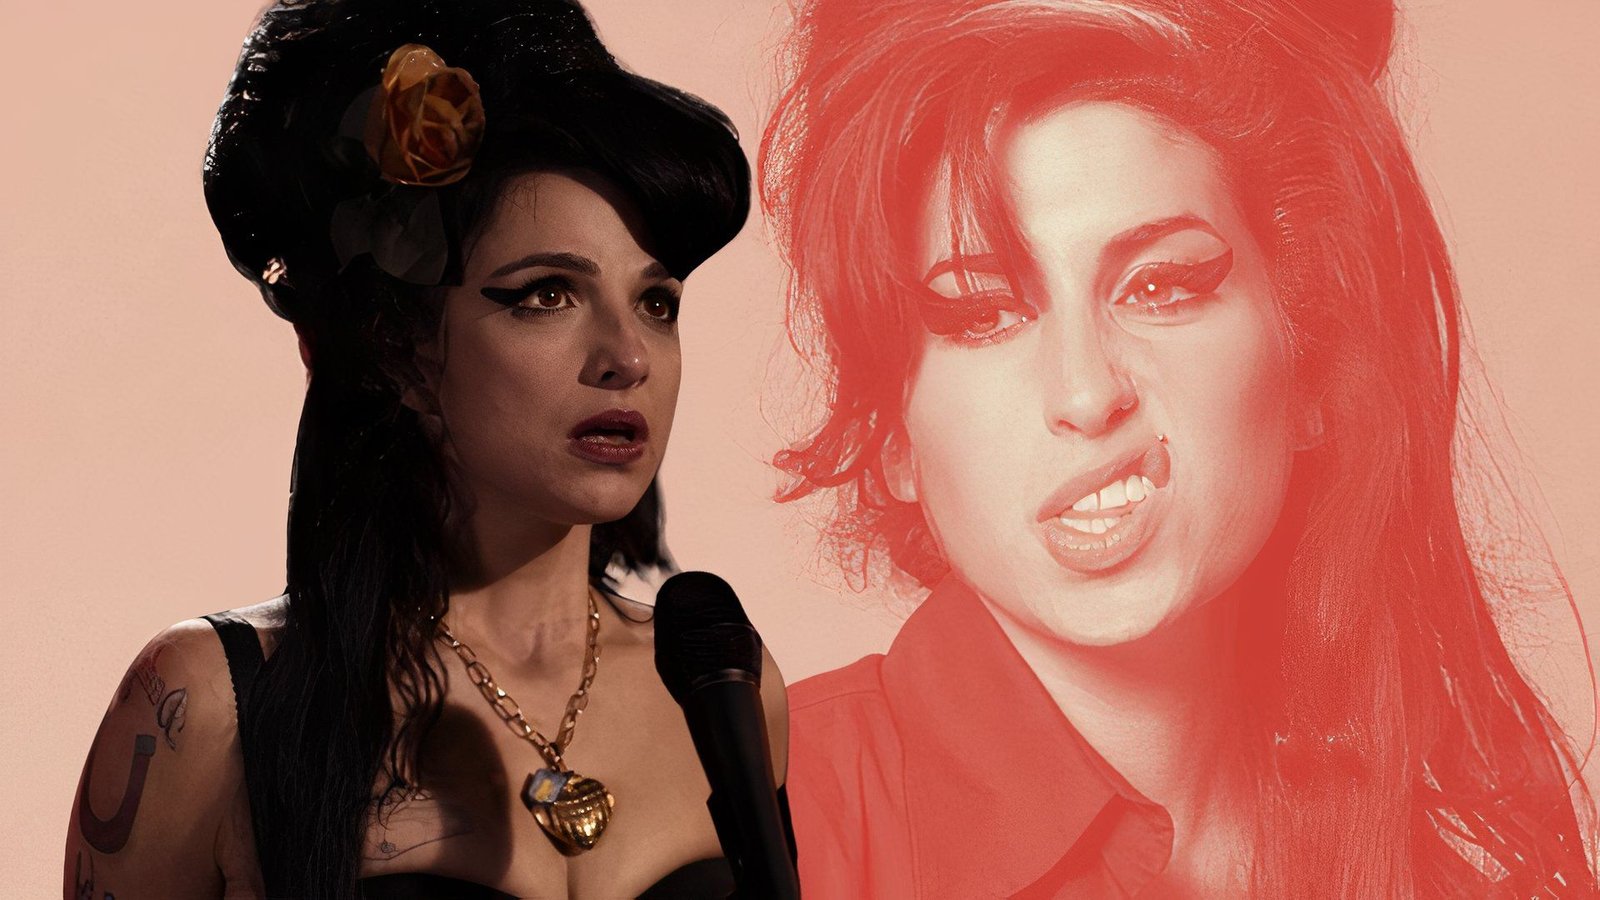 Amy Winehouse's Back to Black Biopic Controversy, Explained